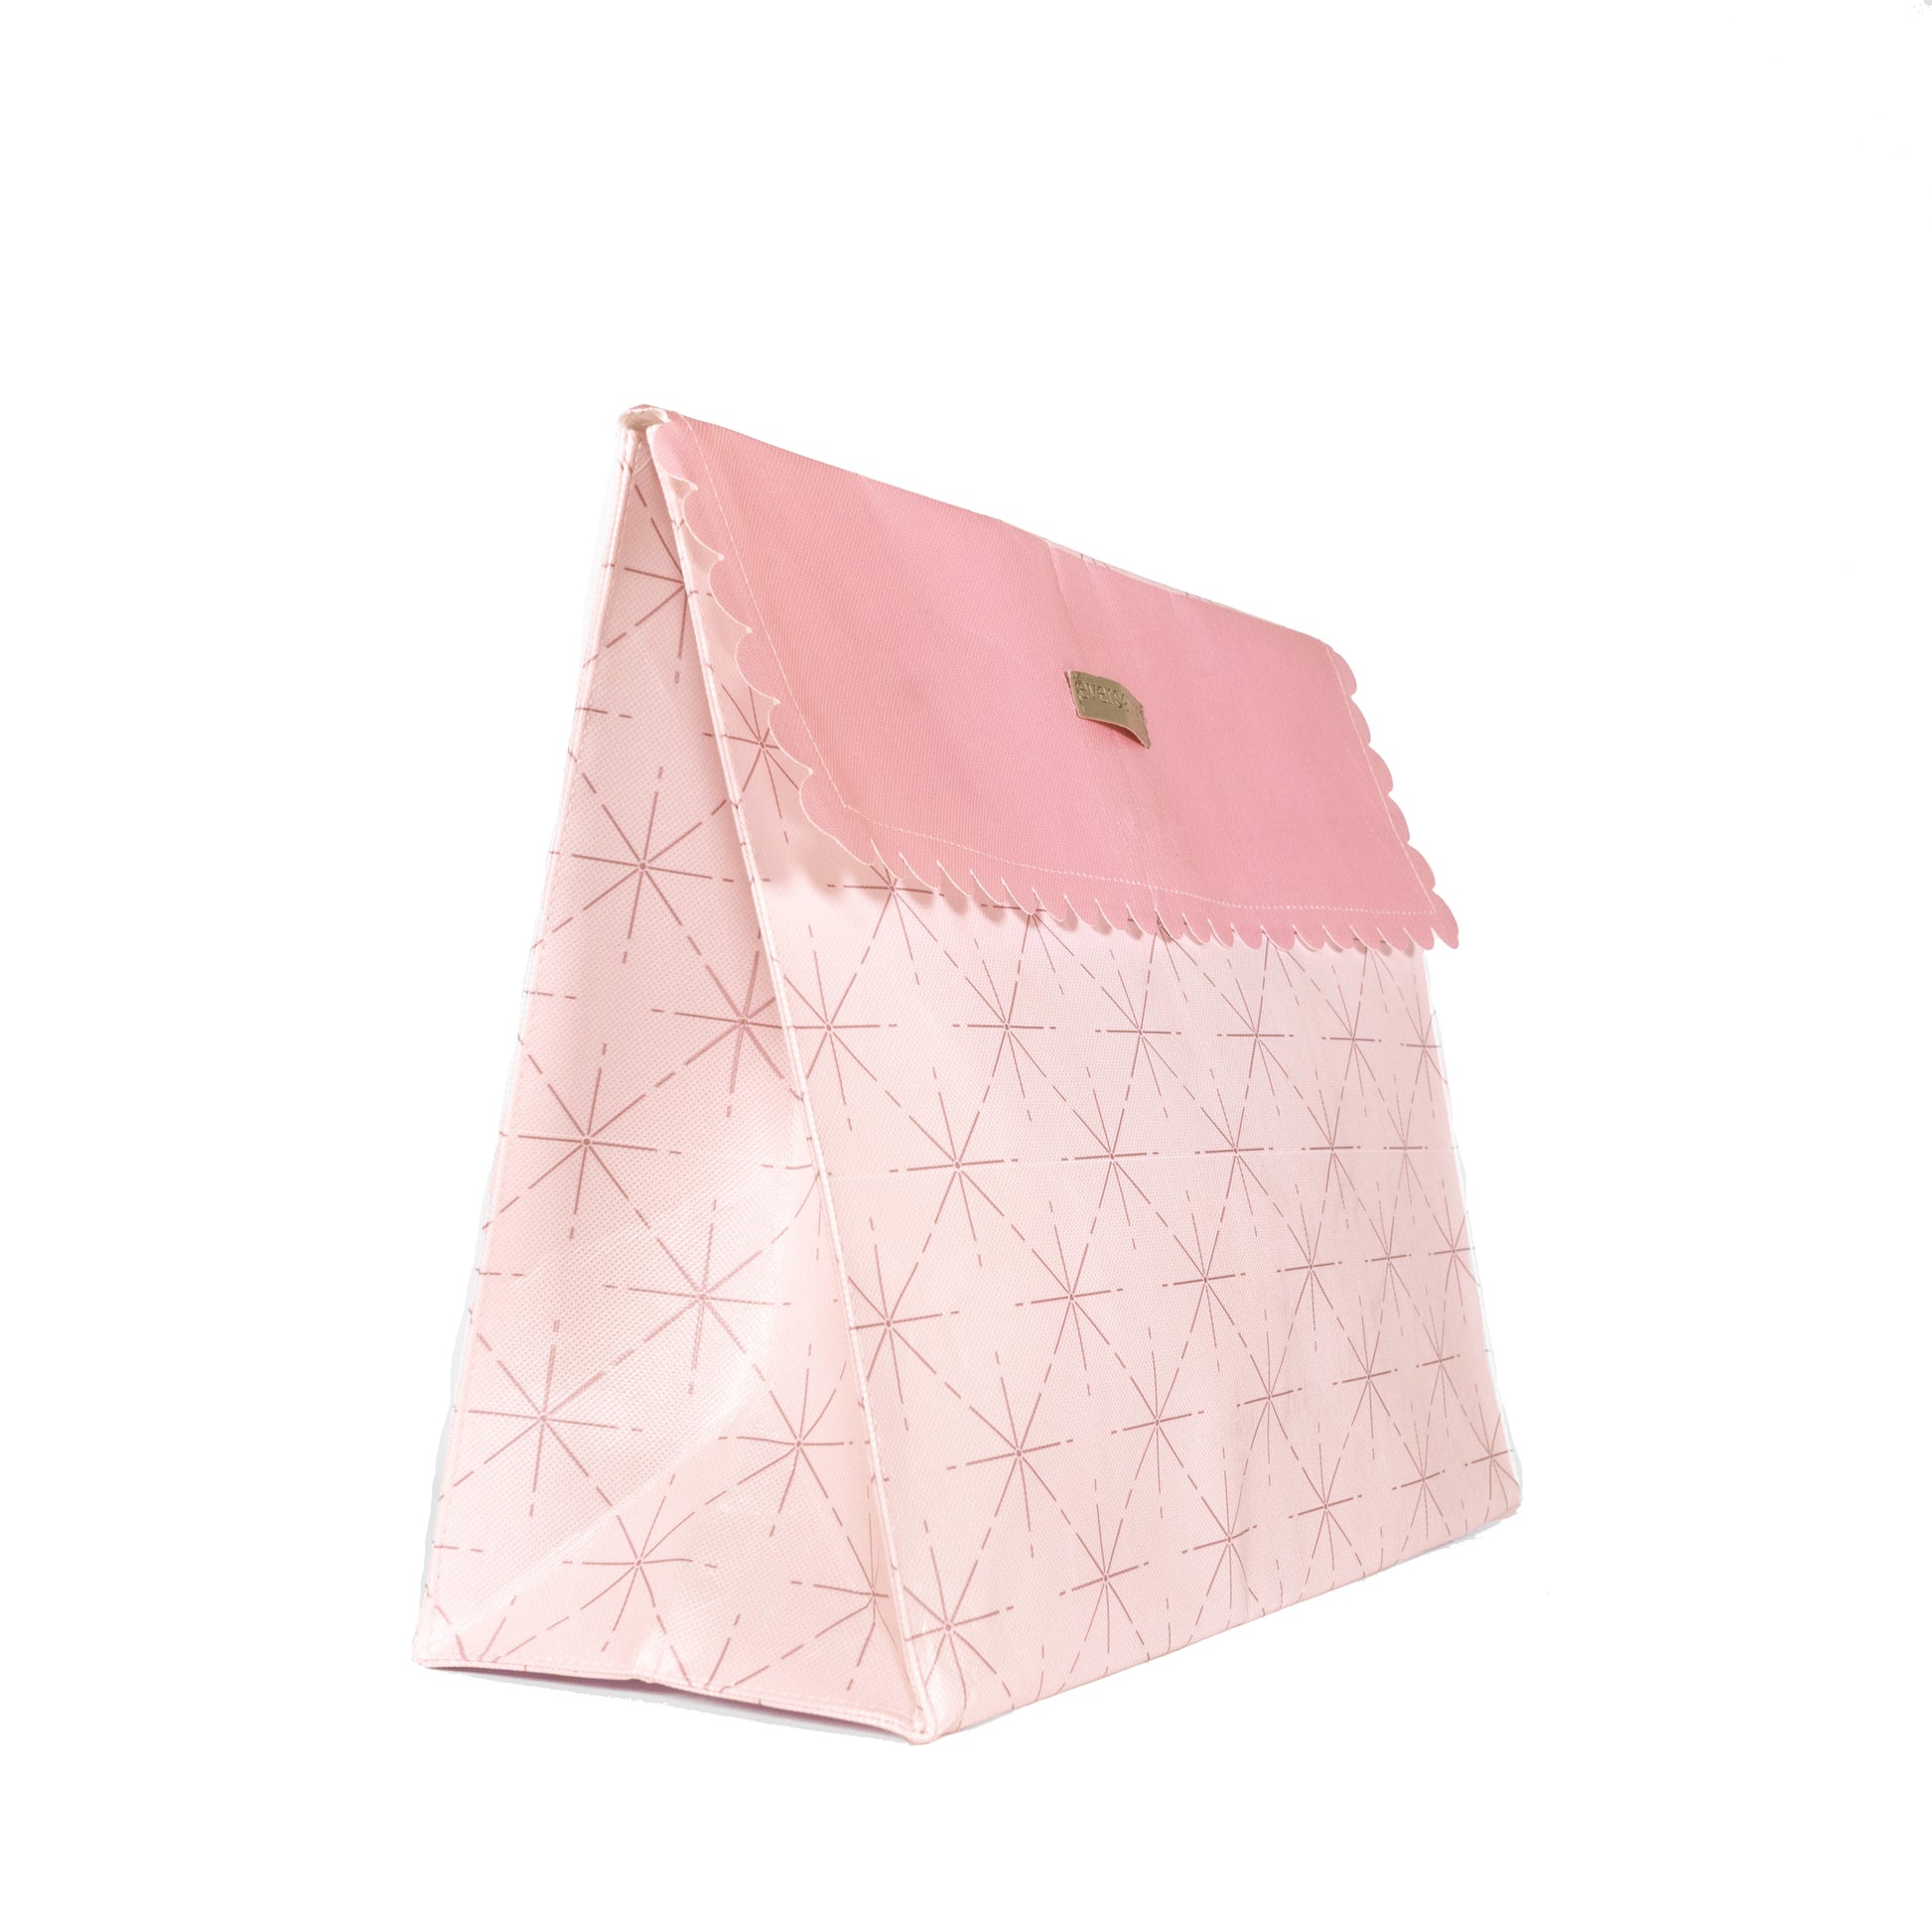 IRREGULAR - Large Pink Reusable Gift Bag with magnet closure and scalloped, heavy duty for maximum reusability - EverWrap